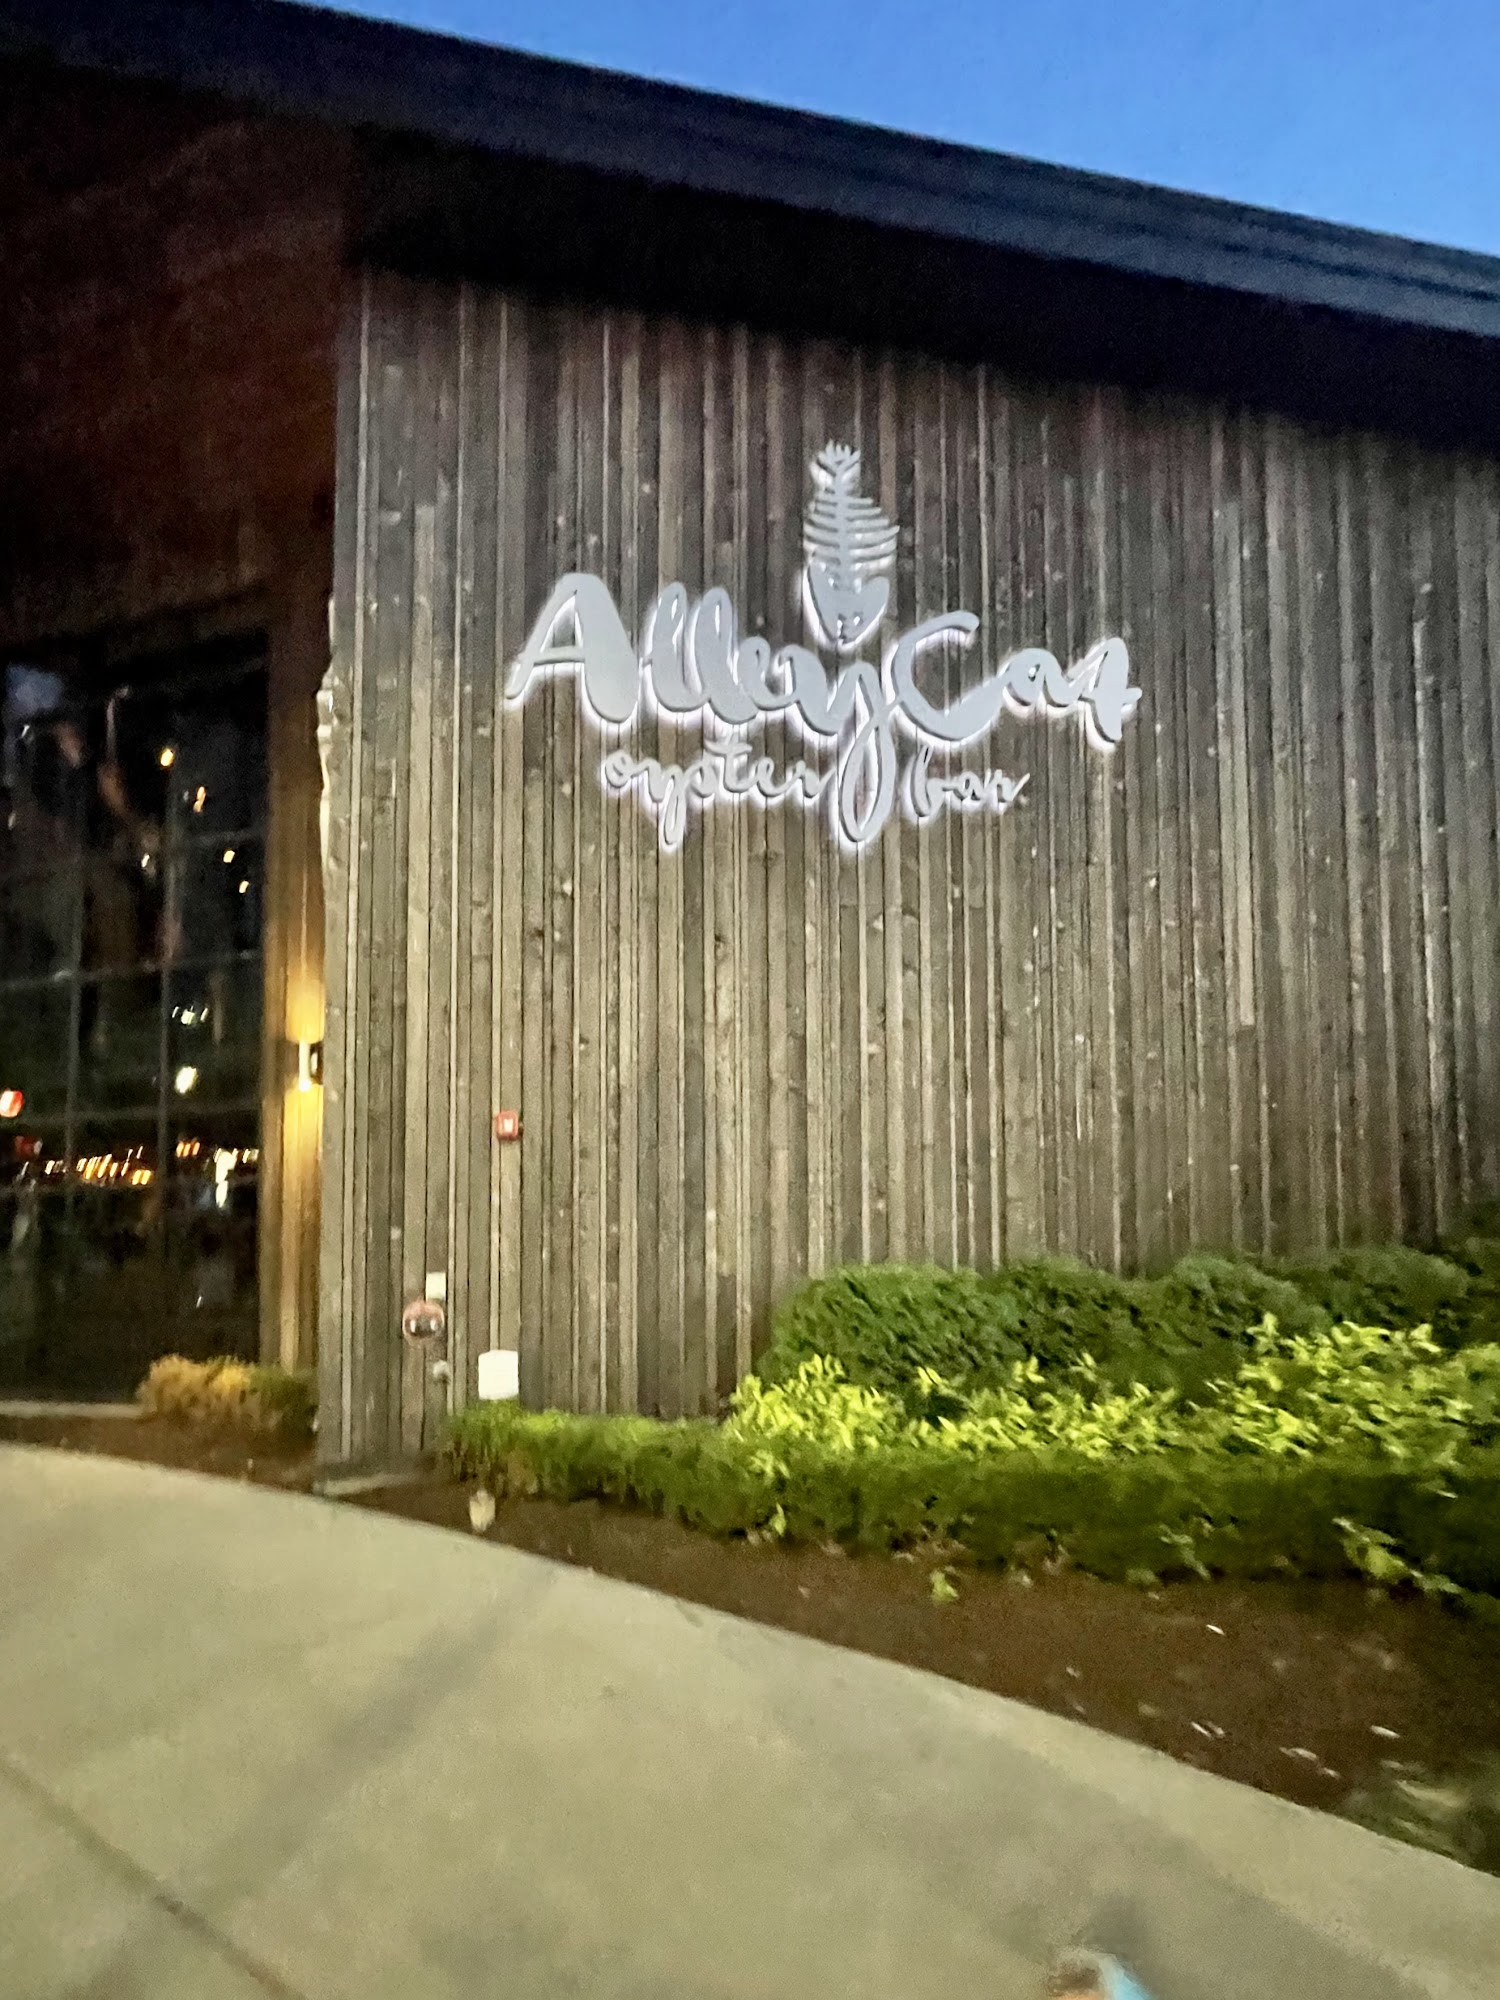 Alley Cat Oyster Bar